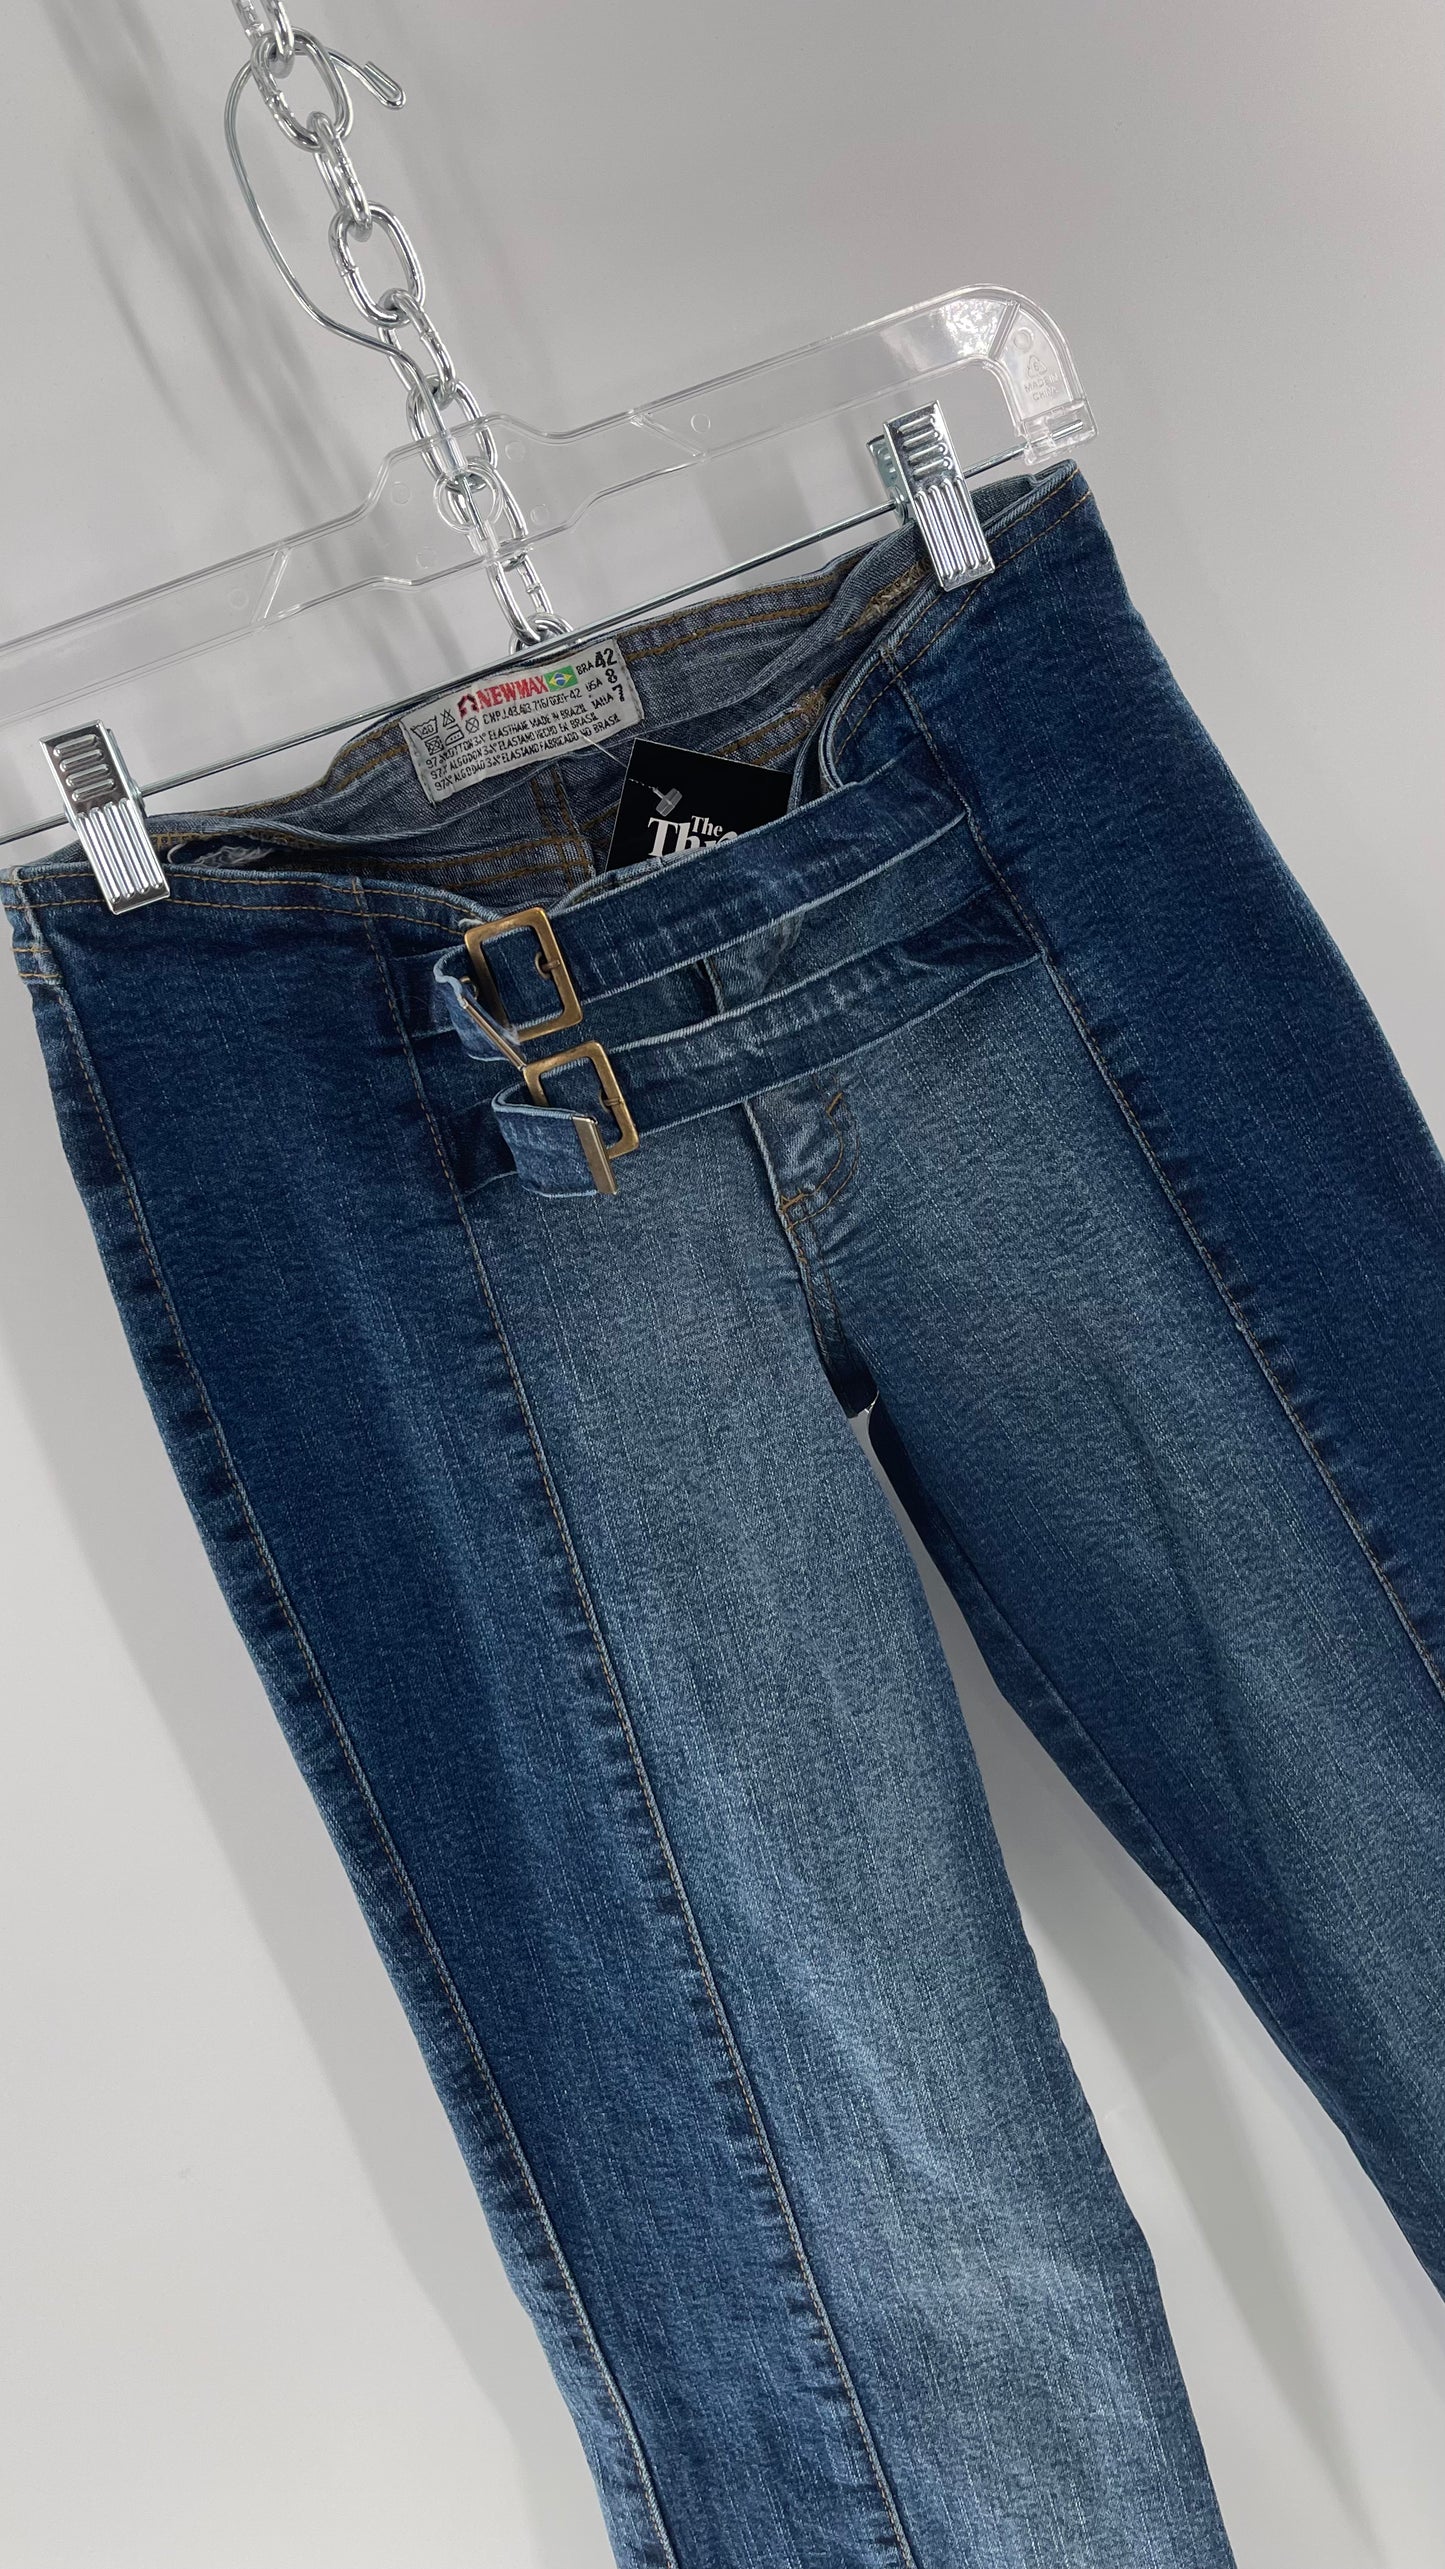 Vintage NewMax Two Toned Paneled Brazilian Jeans with Buckle Jean Strap Closure and Flared Hem (8)